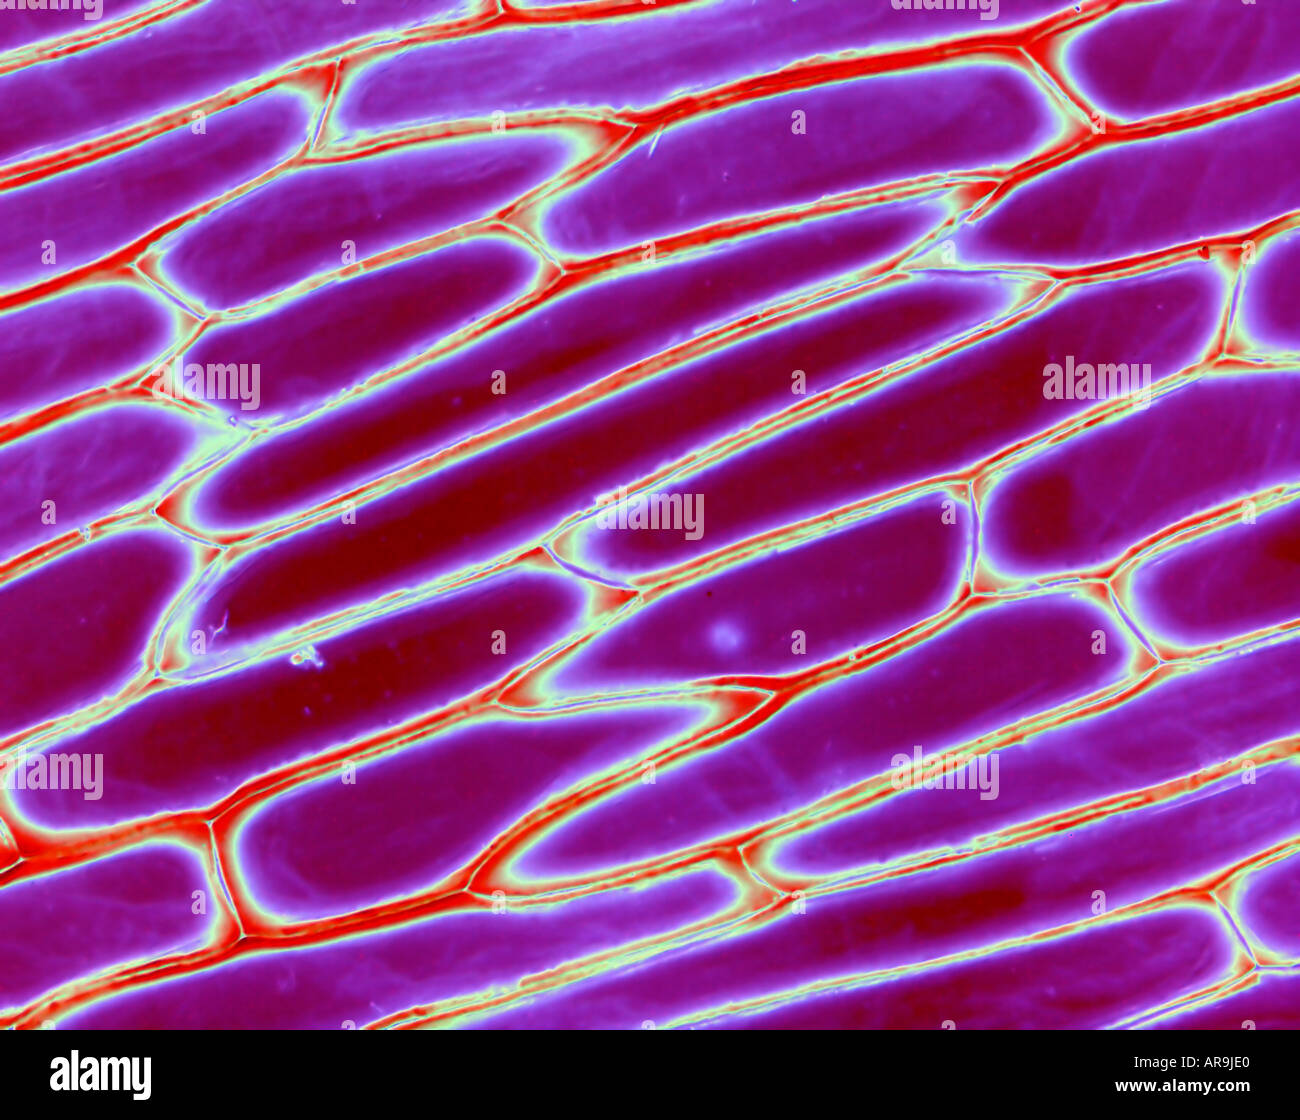 Onion skin in cross section (microscope view) Stock Photo